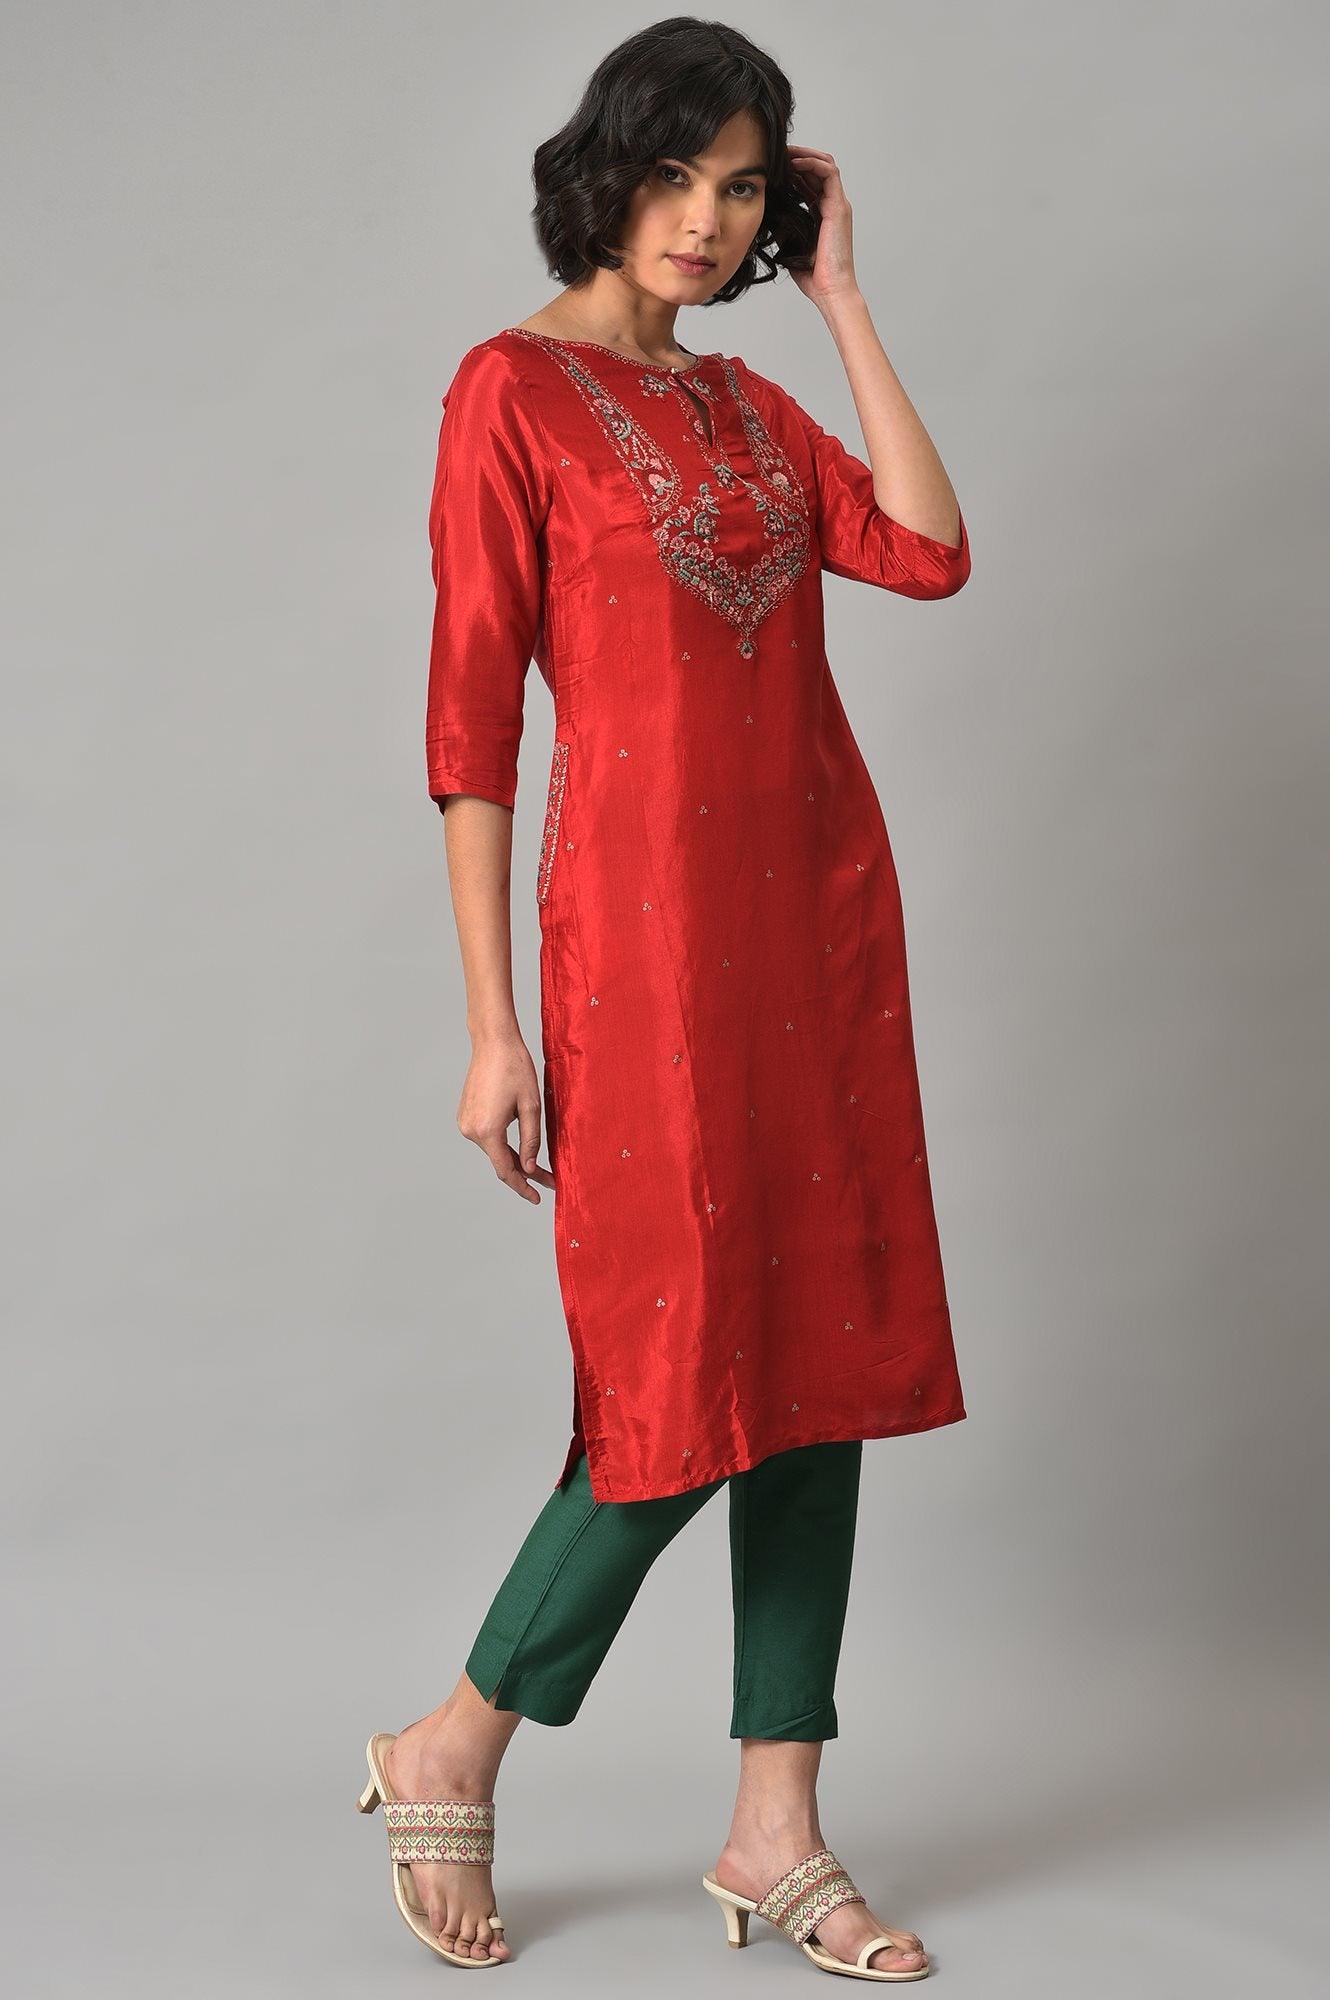 Red Embroidered Festive kurta With Green Slim Pants - wforwoman